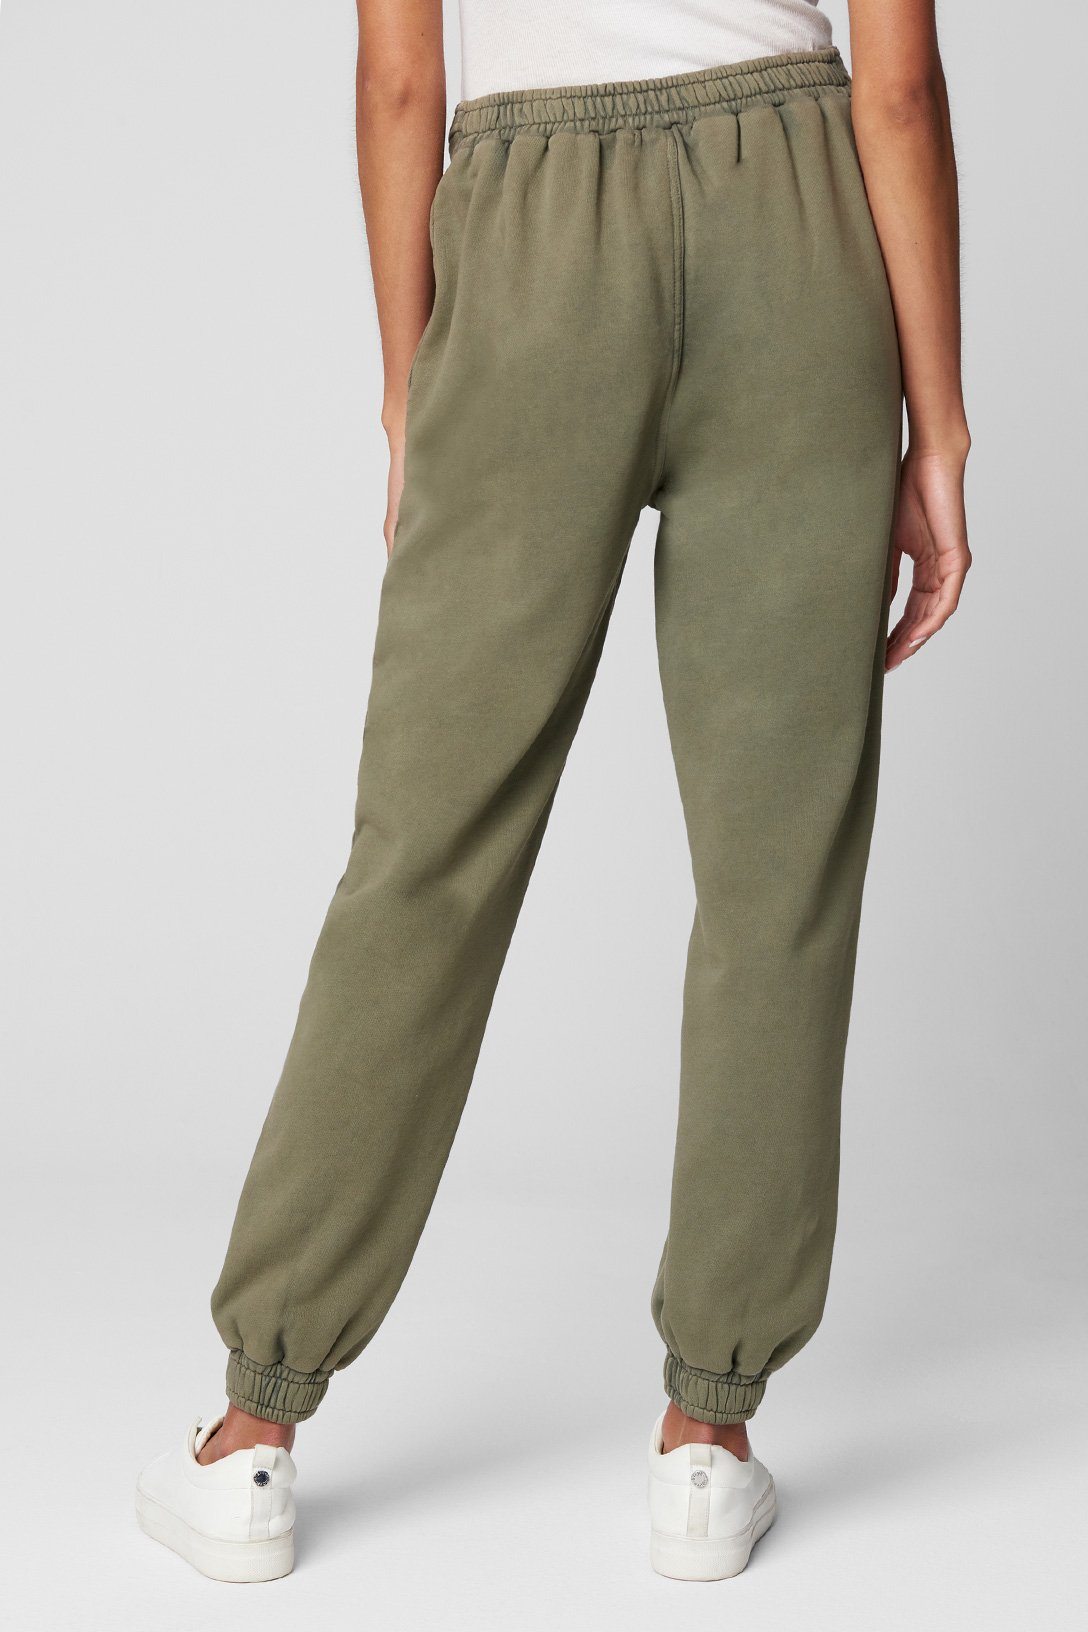 BLANK NYC | The Waiting Sweatpants - Army Green